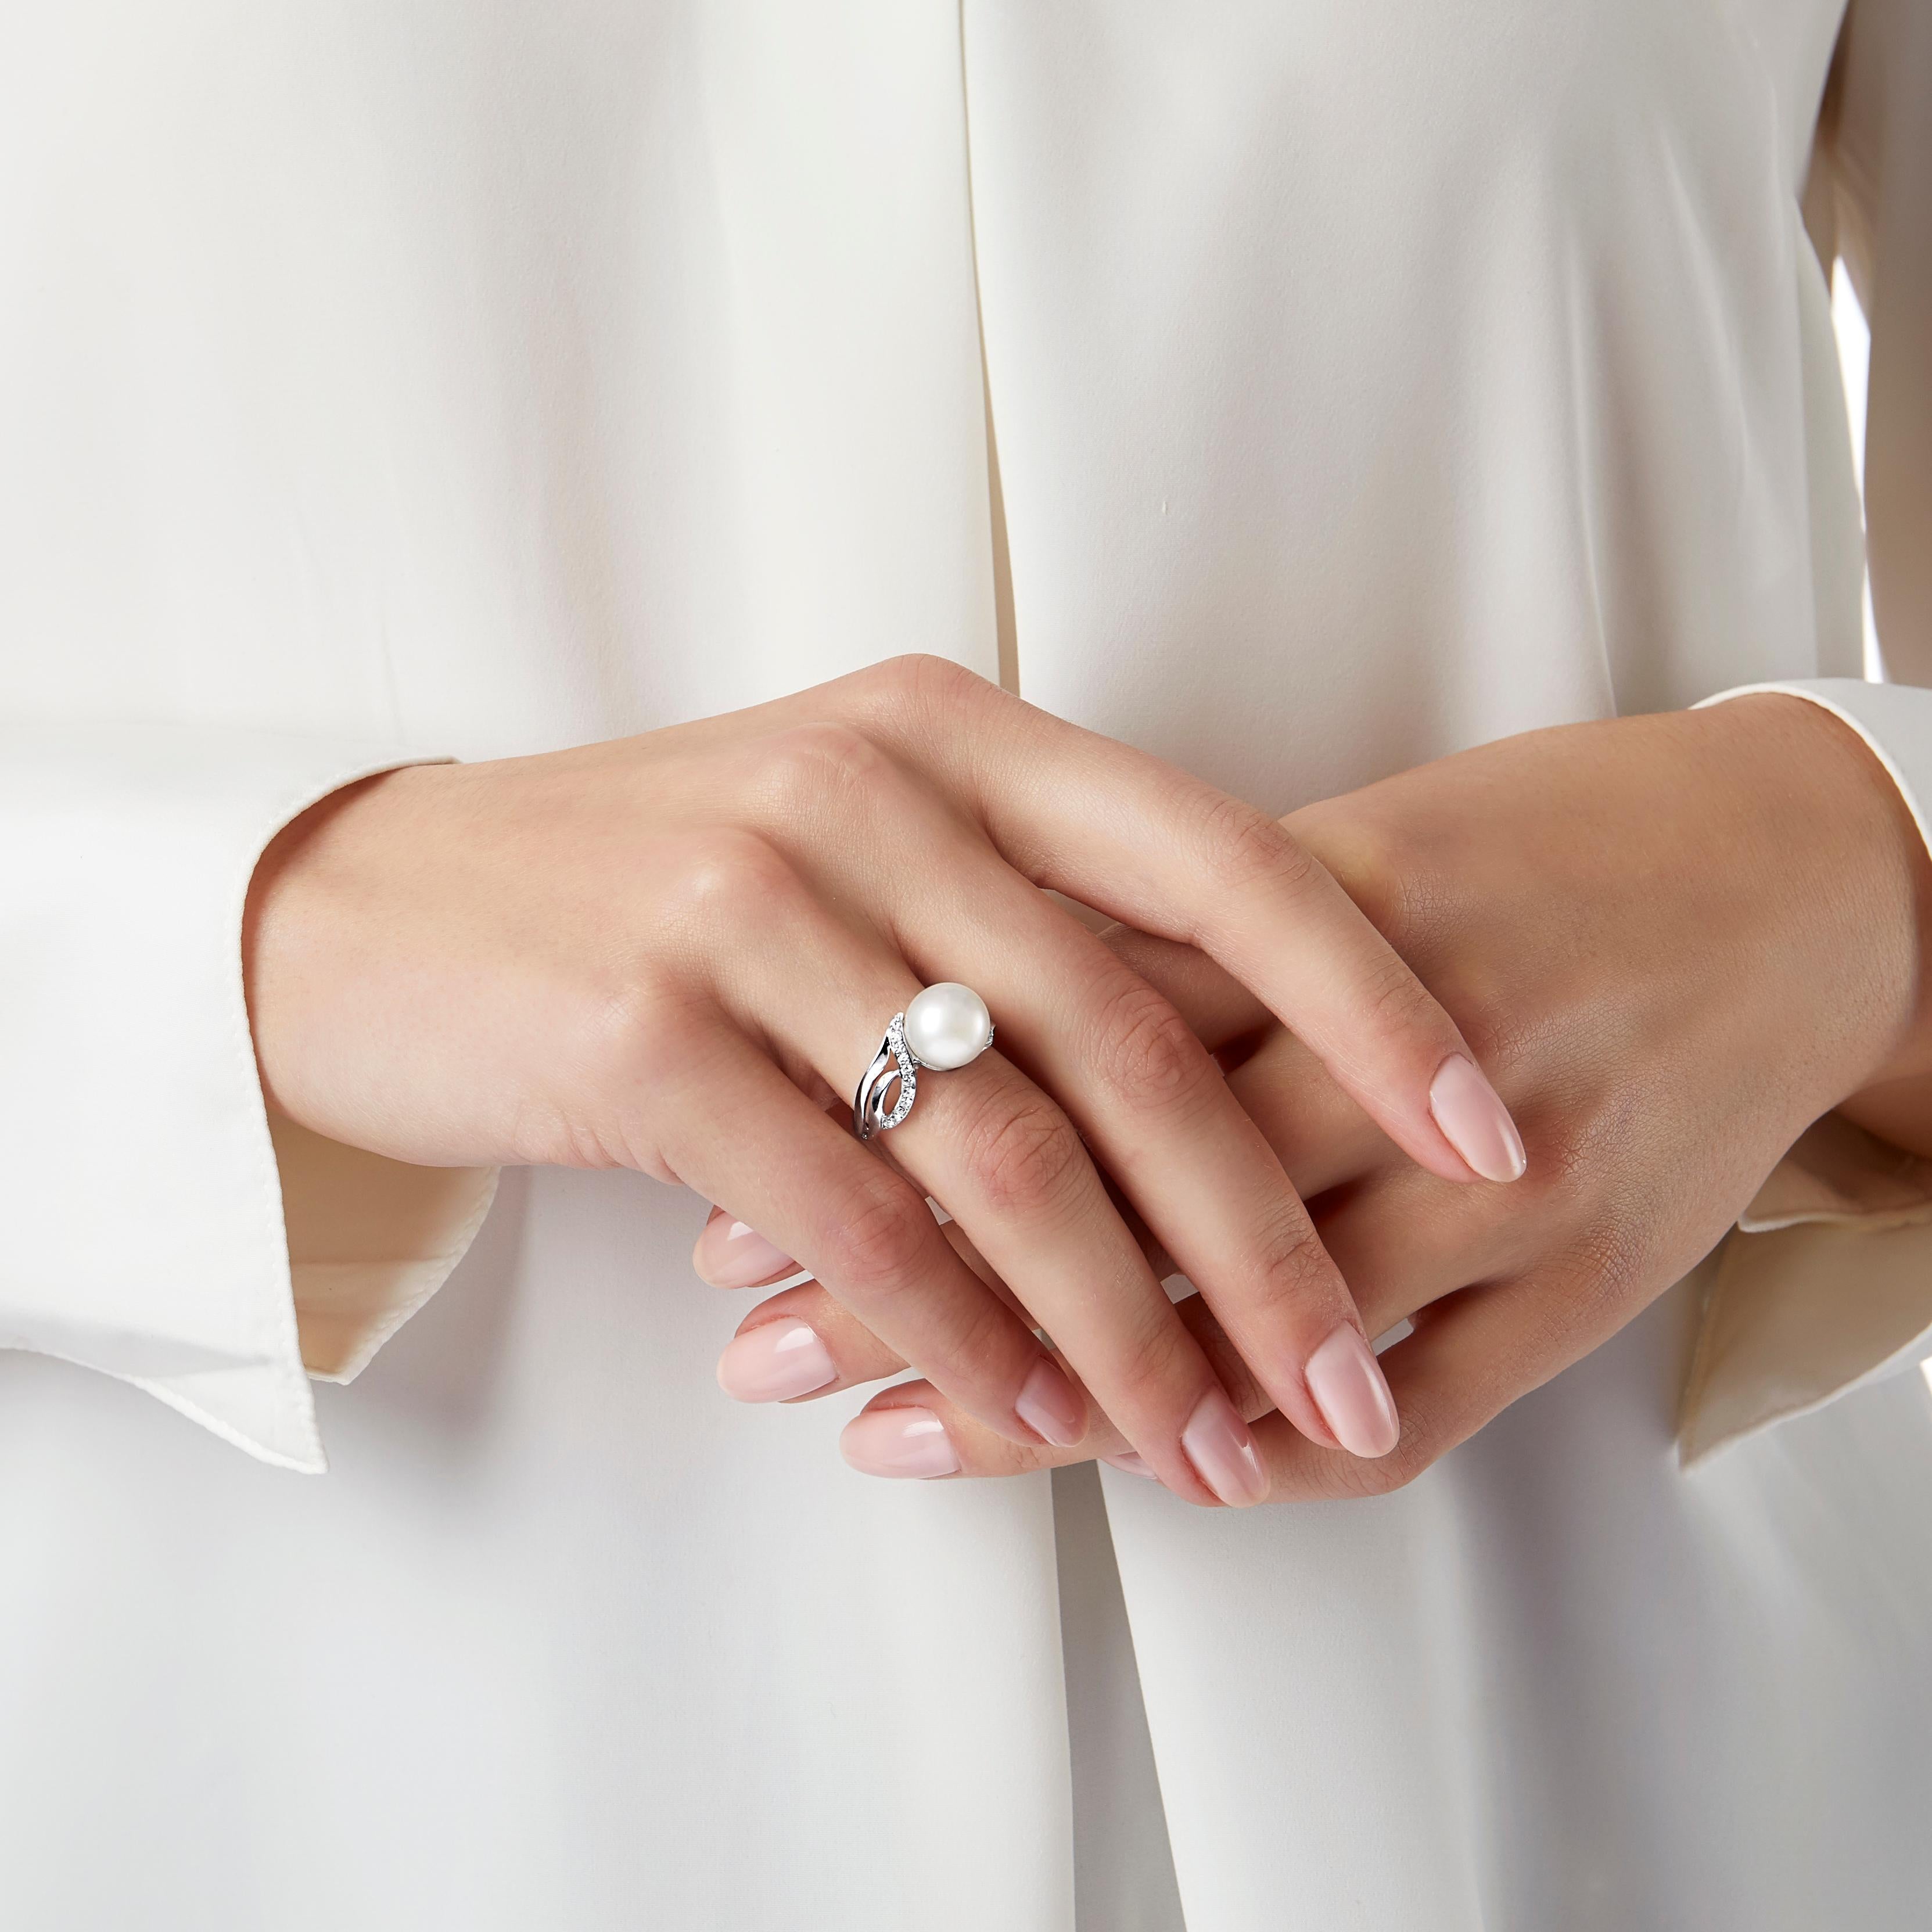 Each piece in our Classic collection is designed to be cherished for generations to come. This elegant ring features a lustrous 10-10.5mm cultured Freshwater pearl, accented by scintillating diamond details. Set in 18K white gold to accentuate the